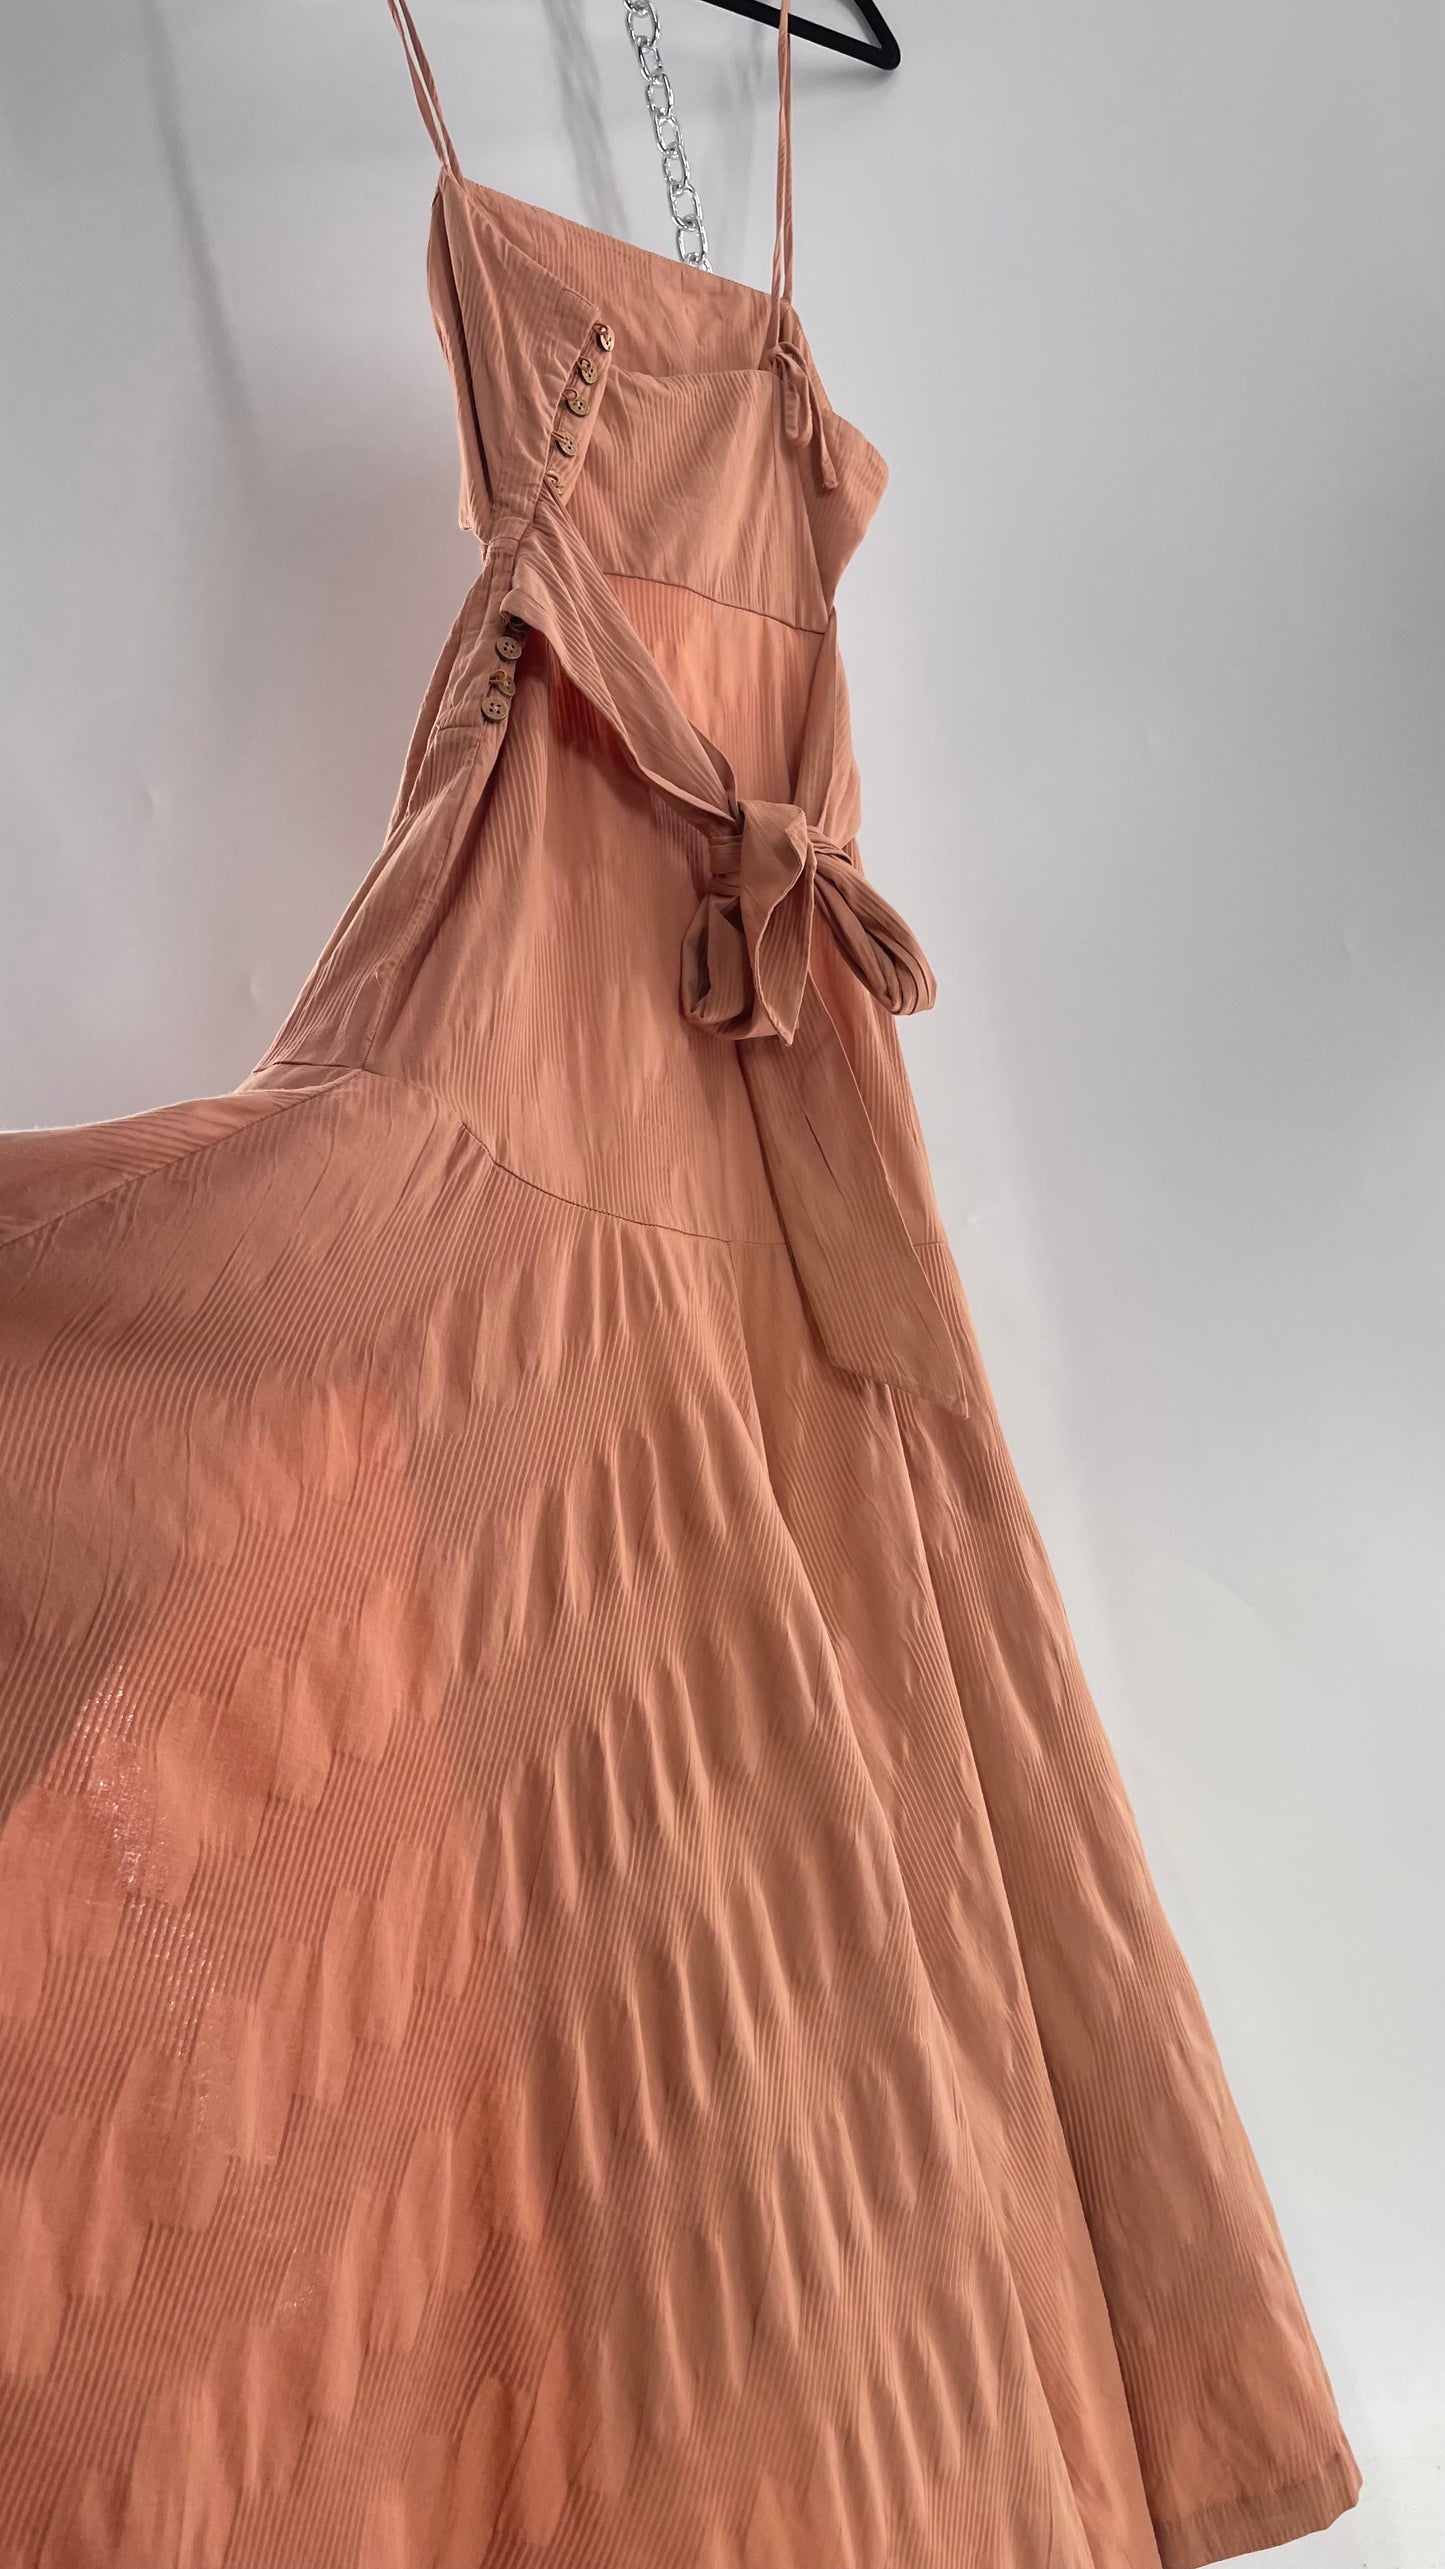 Free People Terracotta/ Smoky Pink Maxi Dress with Exposed Midriff, Waist Bow, and Side Slit with Tags Attached  (M)